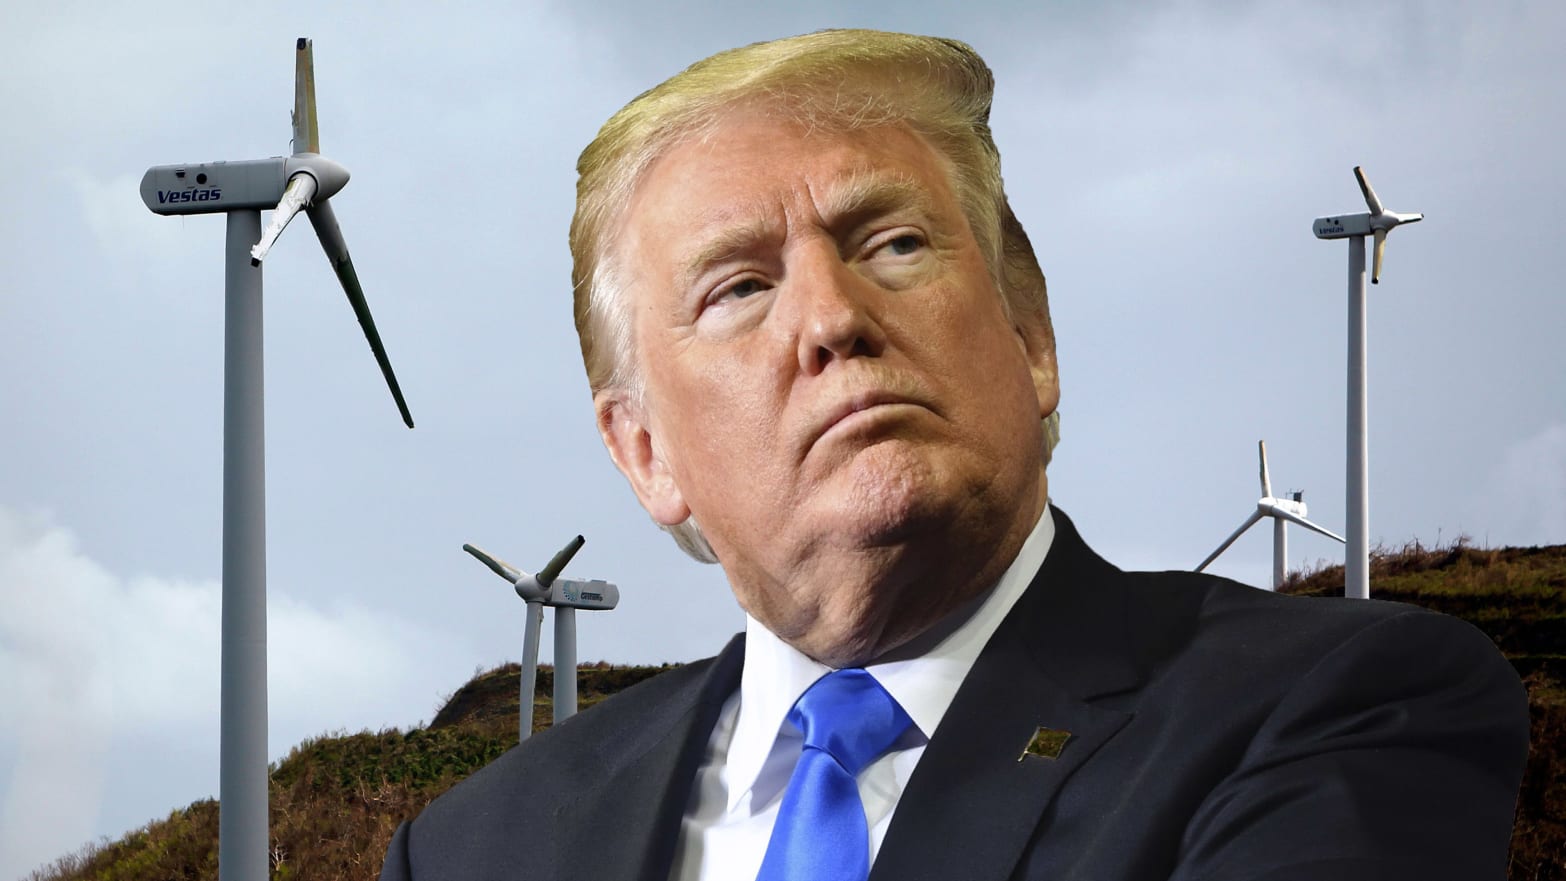 Image result for picture of donald trump and wind turbine